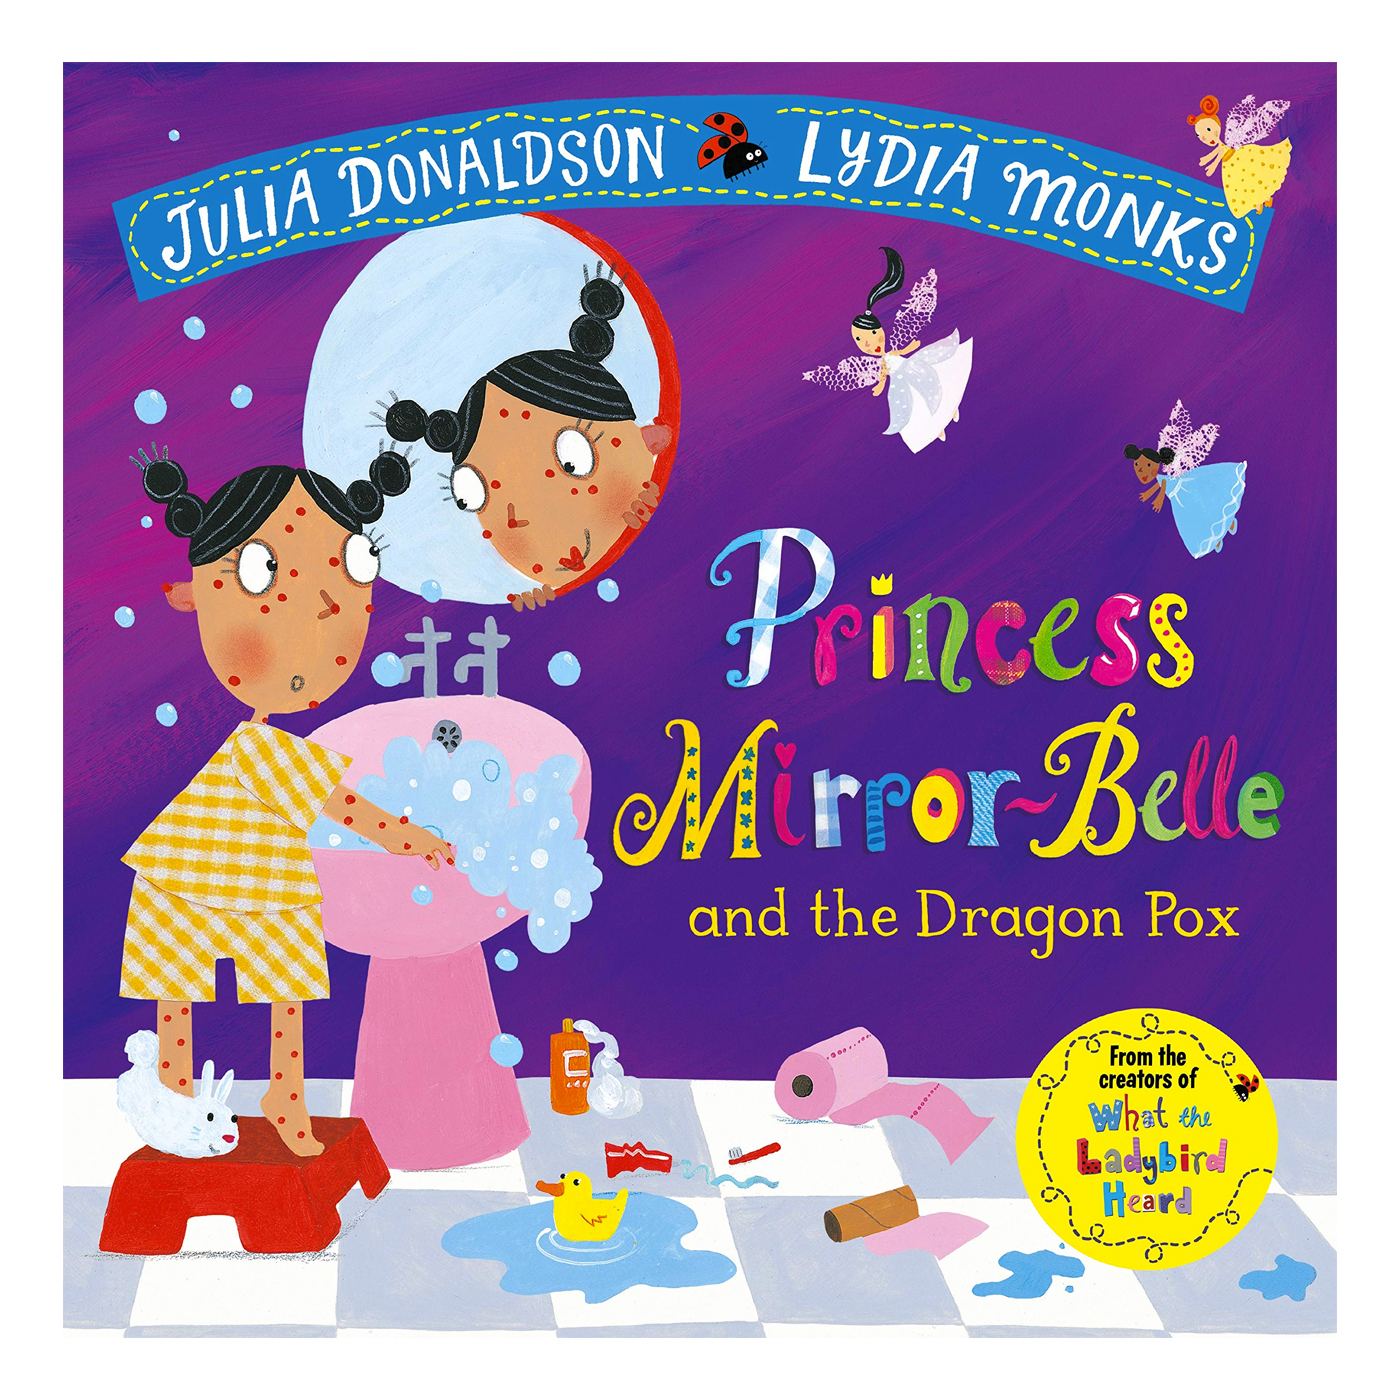  Princess Mirror - Belle and the Dragon Pox